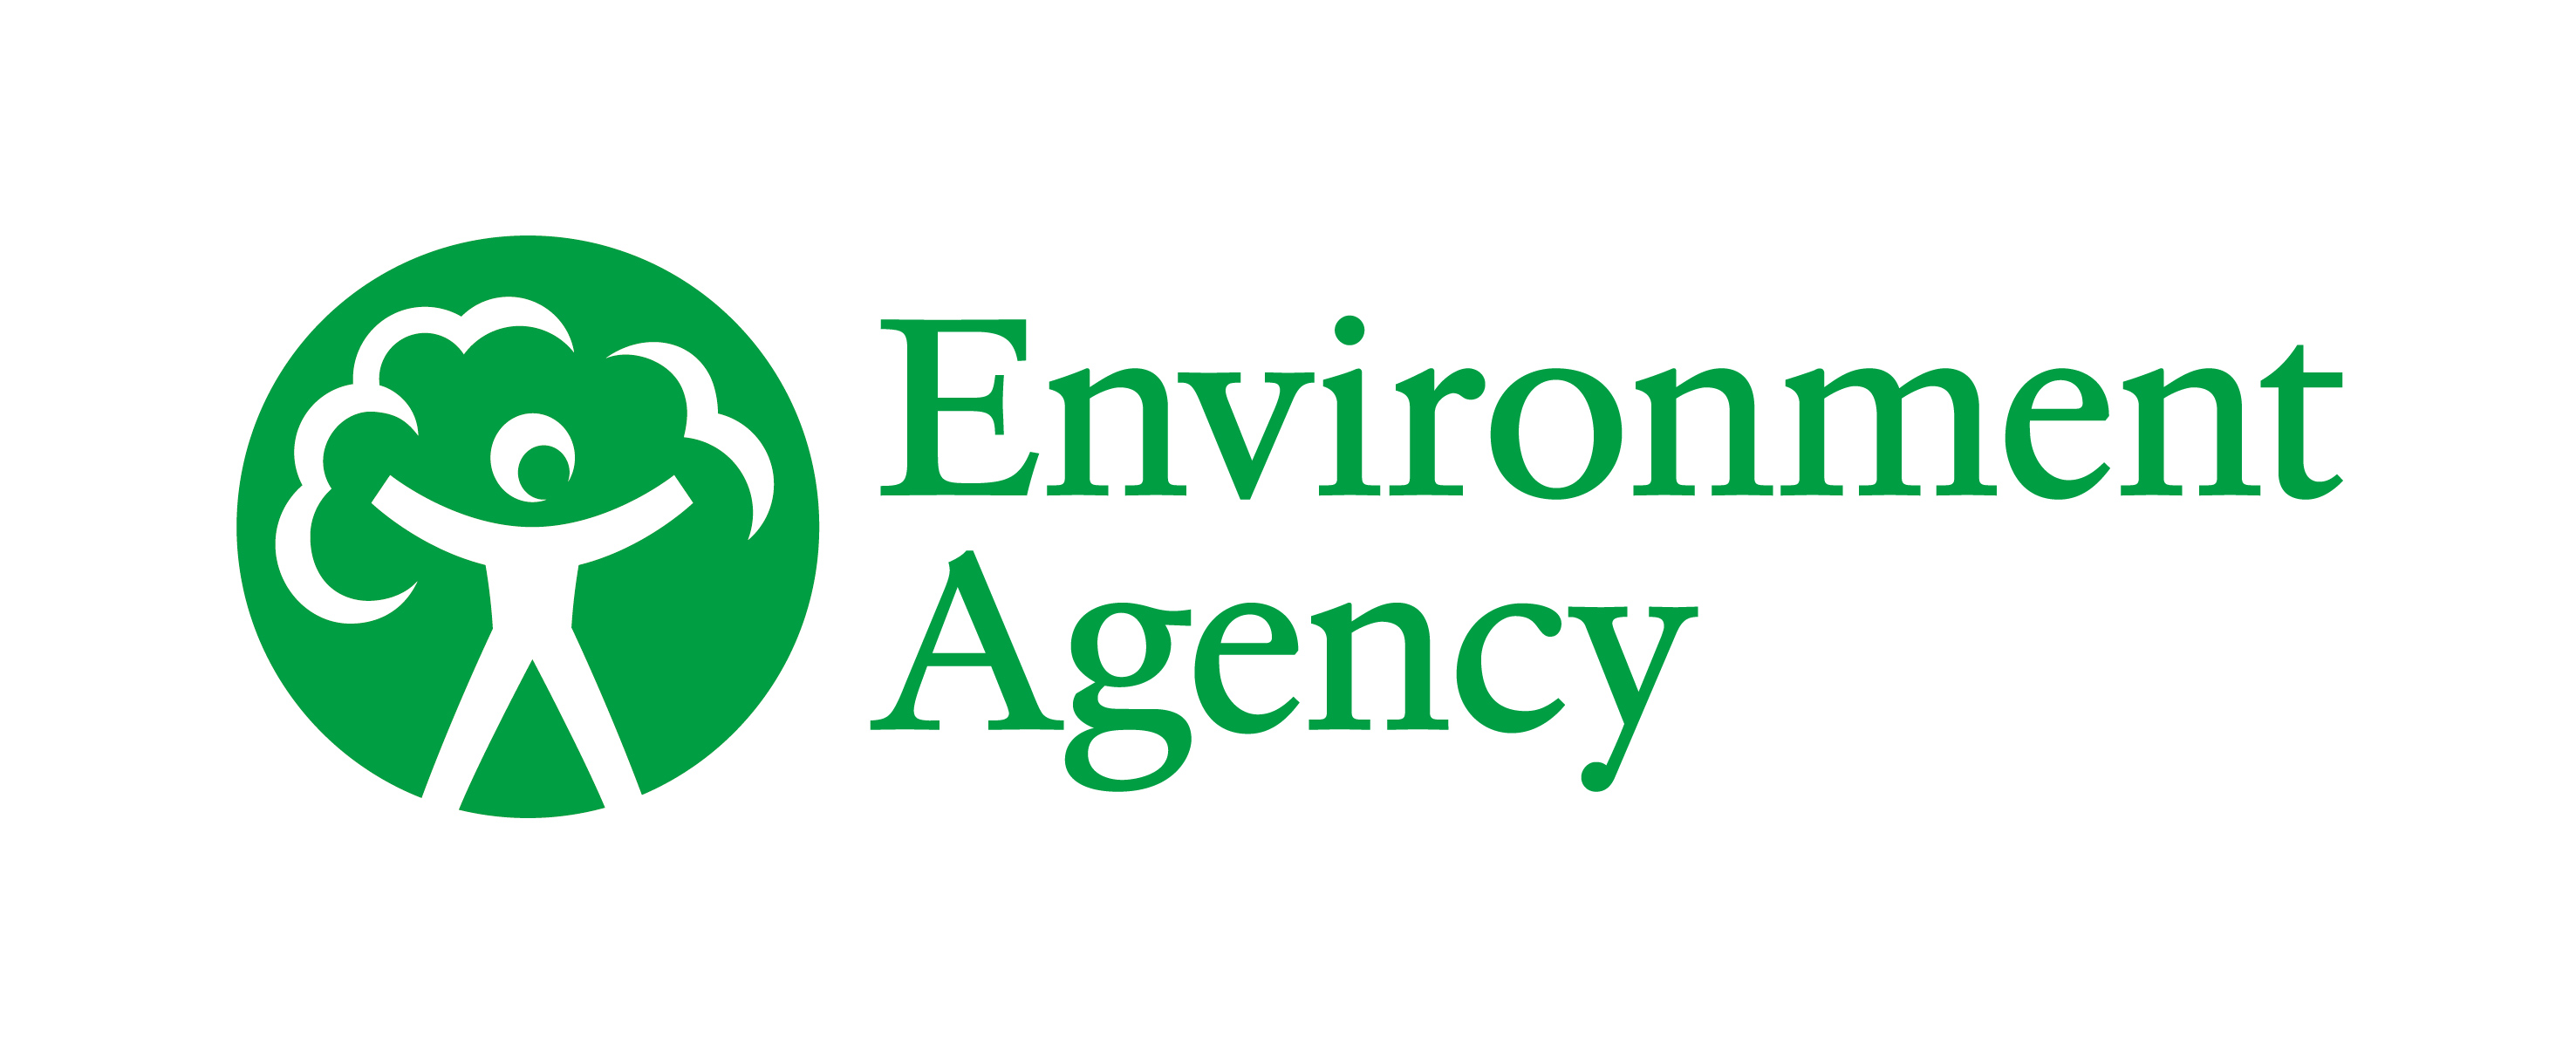 Environment Agency publishes water quality permit charging consultation results